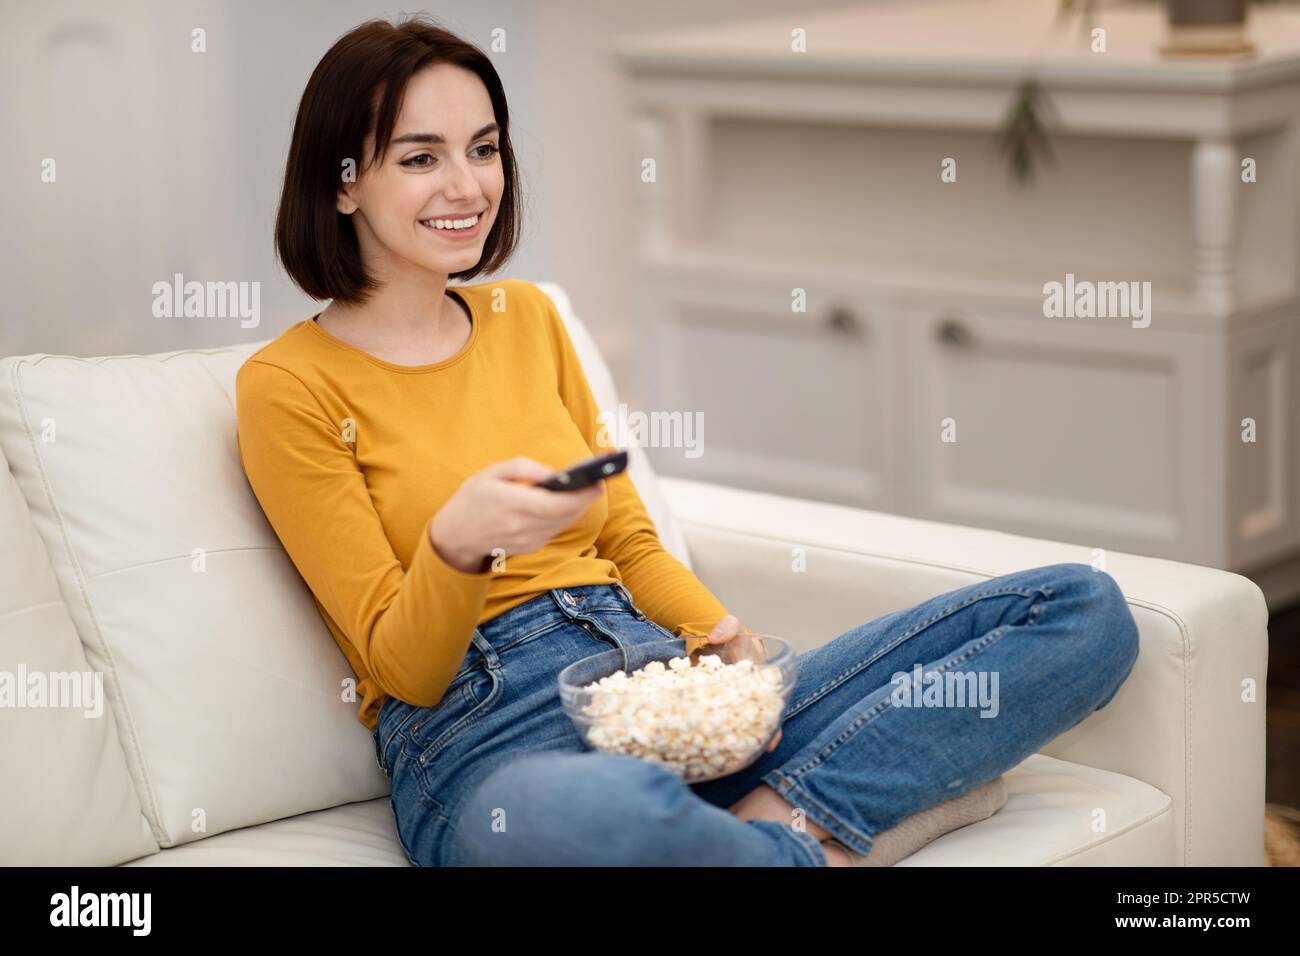 Reaxed pretty young woman relaxing at home, watching TV Stock Photo